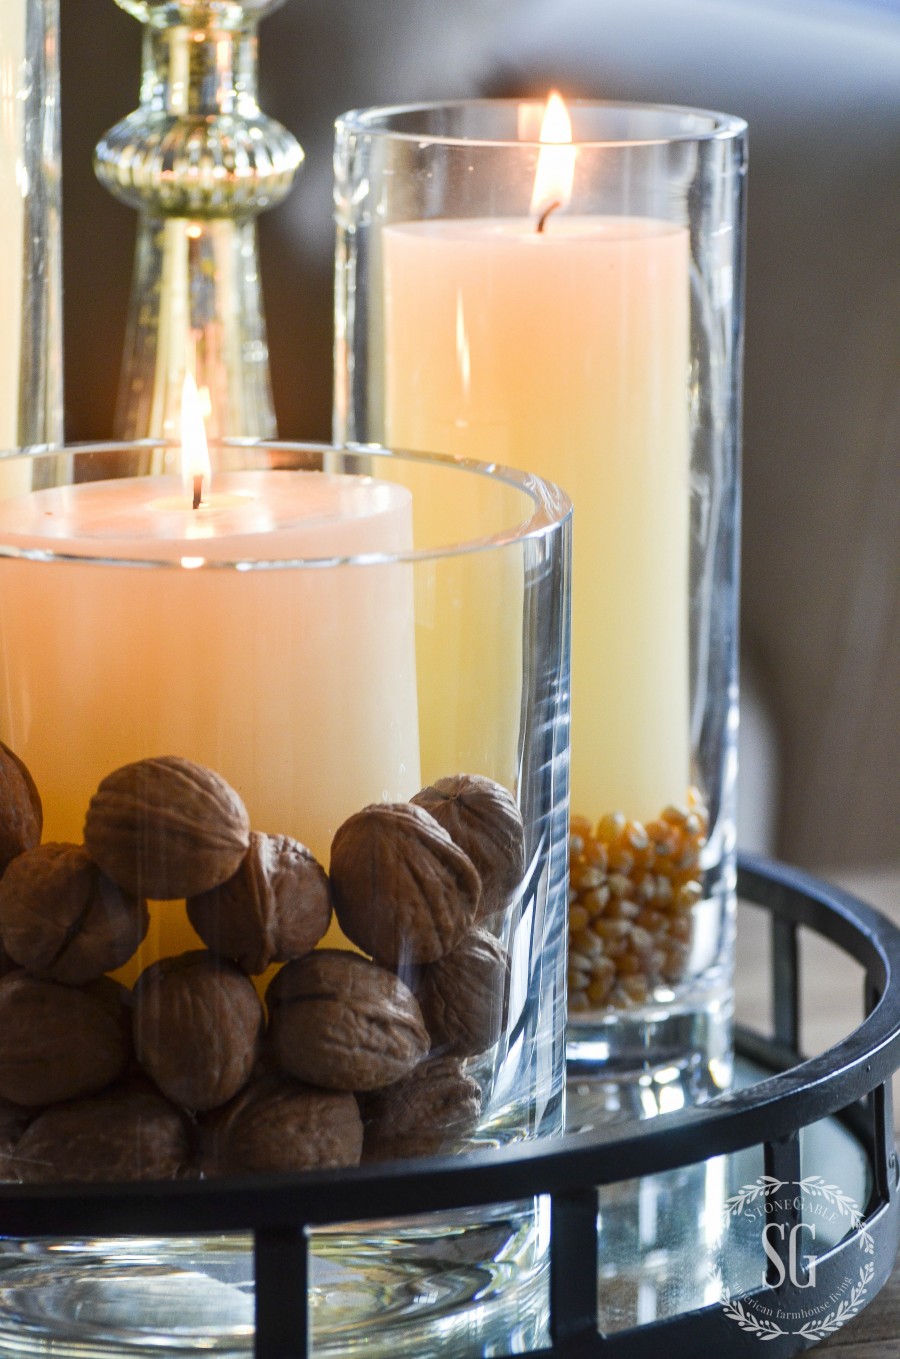 THANKSGIVING 10 MINUTE DECOR- Creating Thanksgiving ambiance with creative and beautiful use of candles